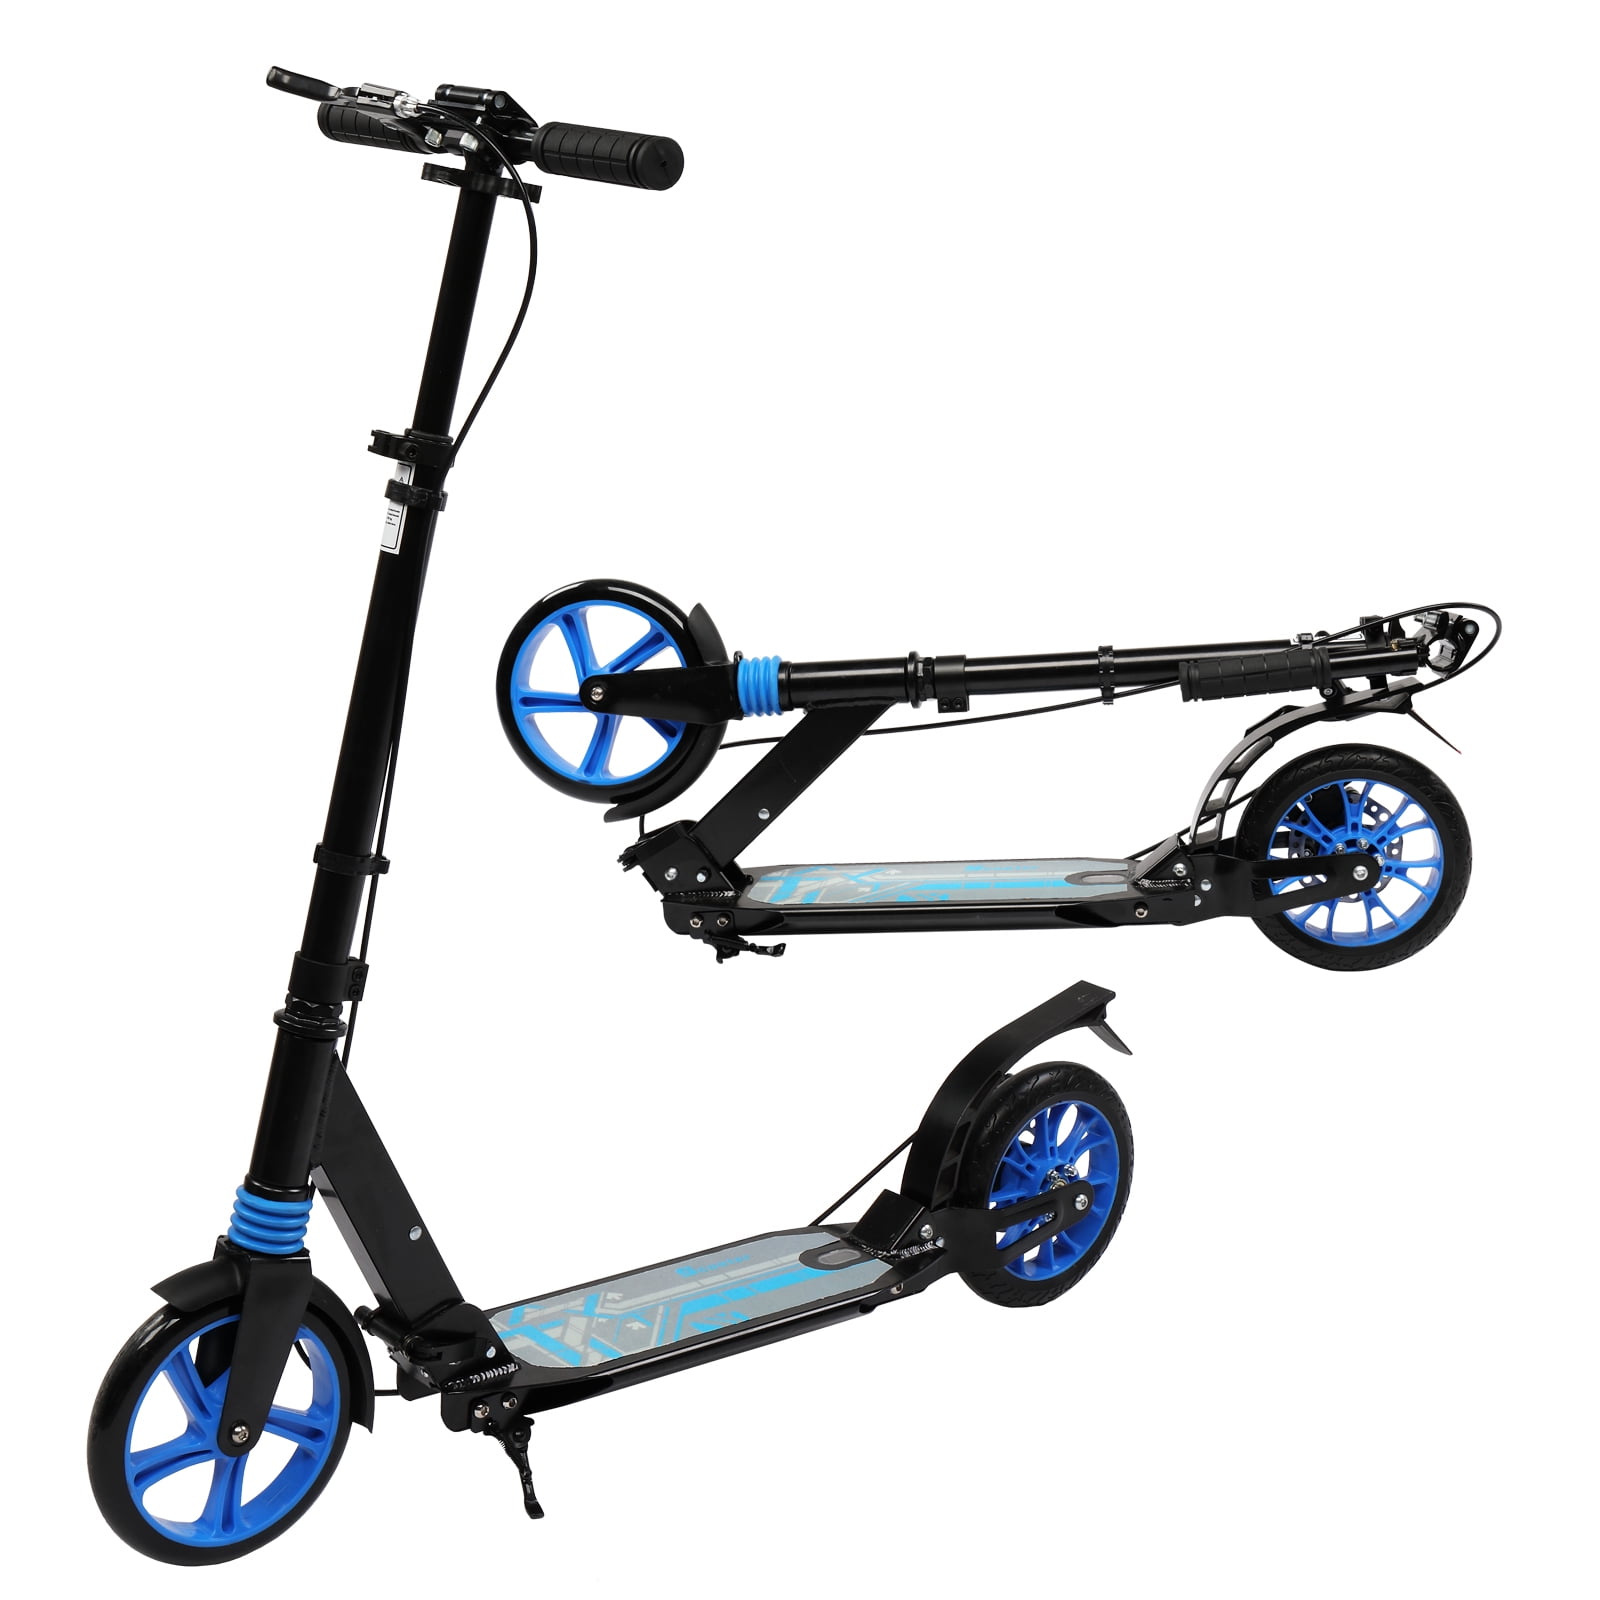 Details about   Kick Scooter Extra Large PU Wheels Foldable Adjustable Height for Adults/Teens 